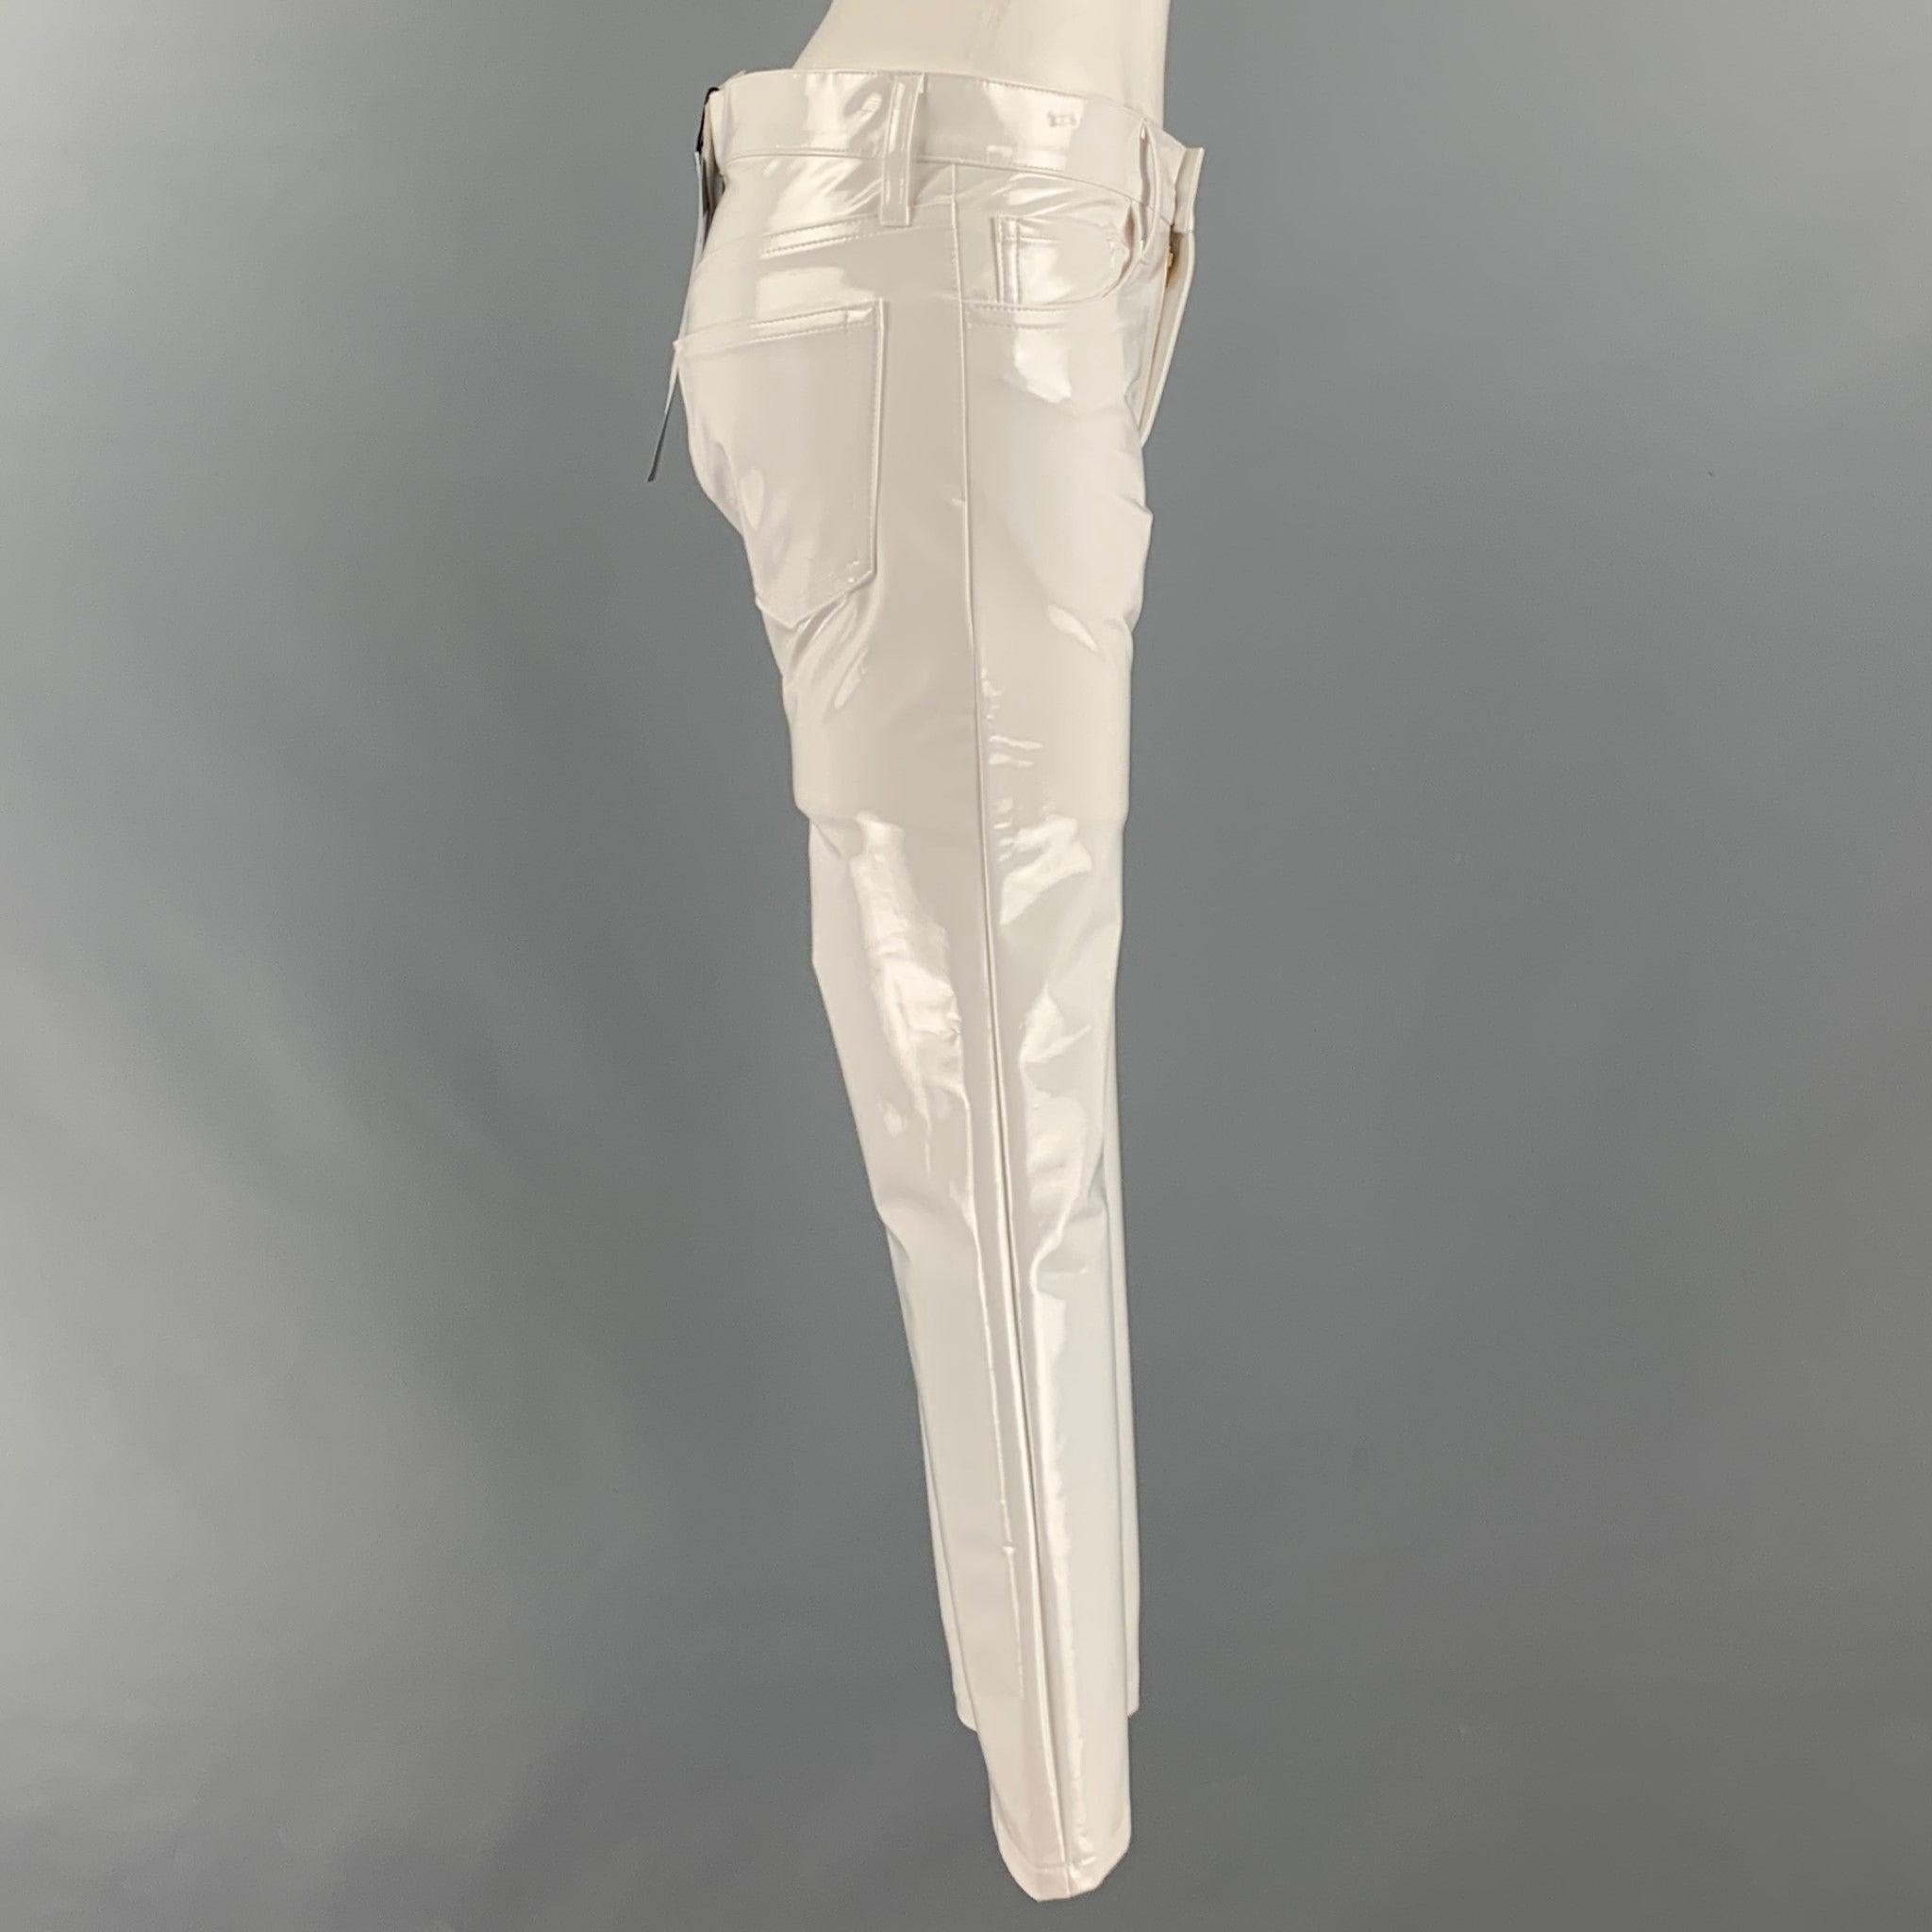 JUNYA WATANABE Comme des Garcons AD 2019 pants comes in a white polyester leather like material featuring a straight leg, jean cut with five pockets, and a zipper fly closure. Made in Japan.New with Tags. 

Marked:   S 

Measurements: 
  Waist: 31